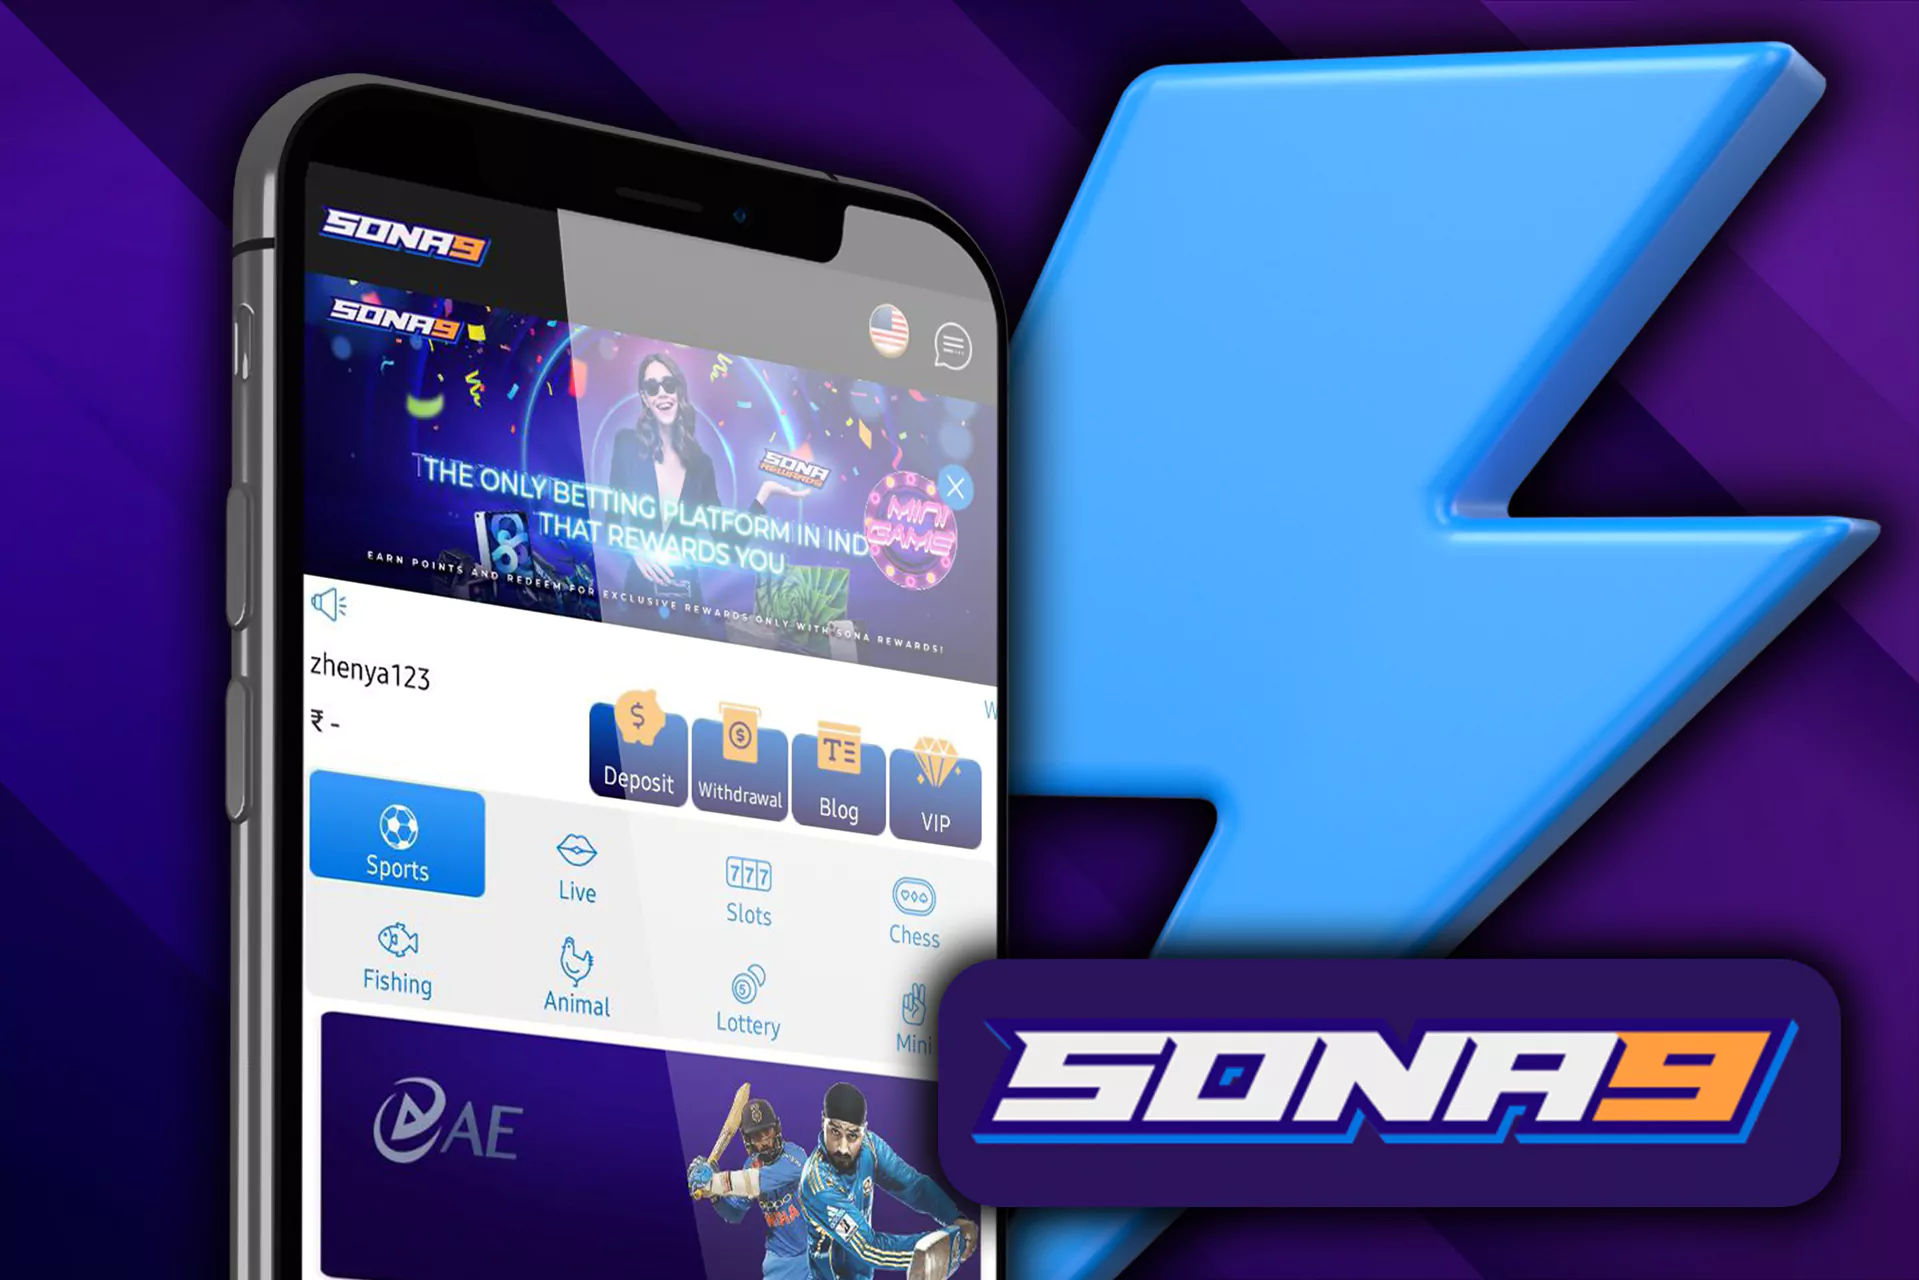 Sona9 runs smoothly and fastly on any mobile device.